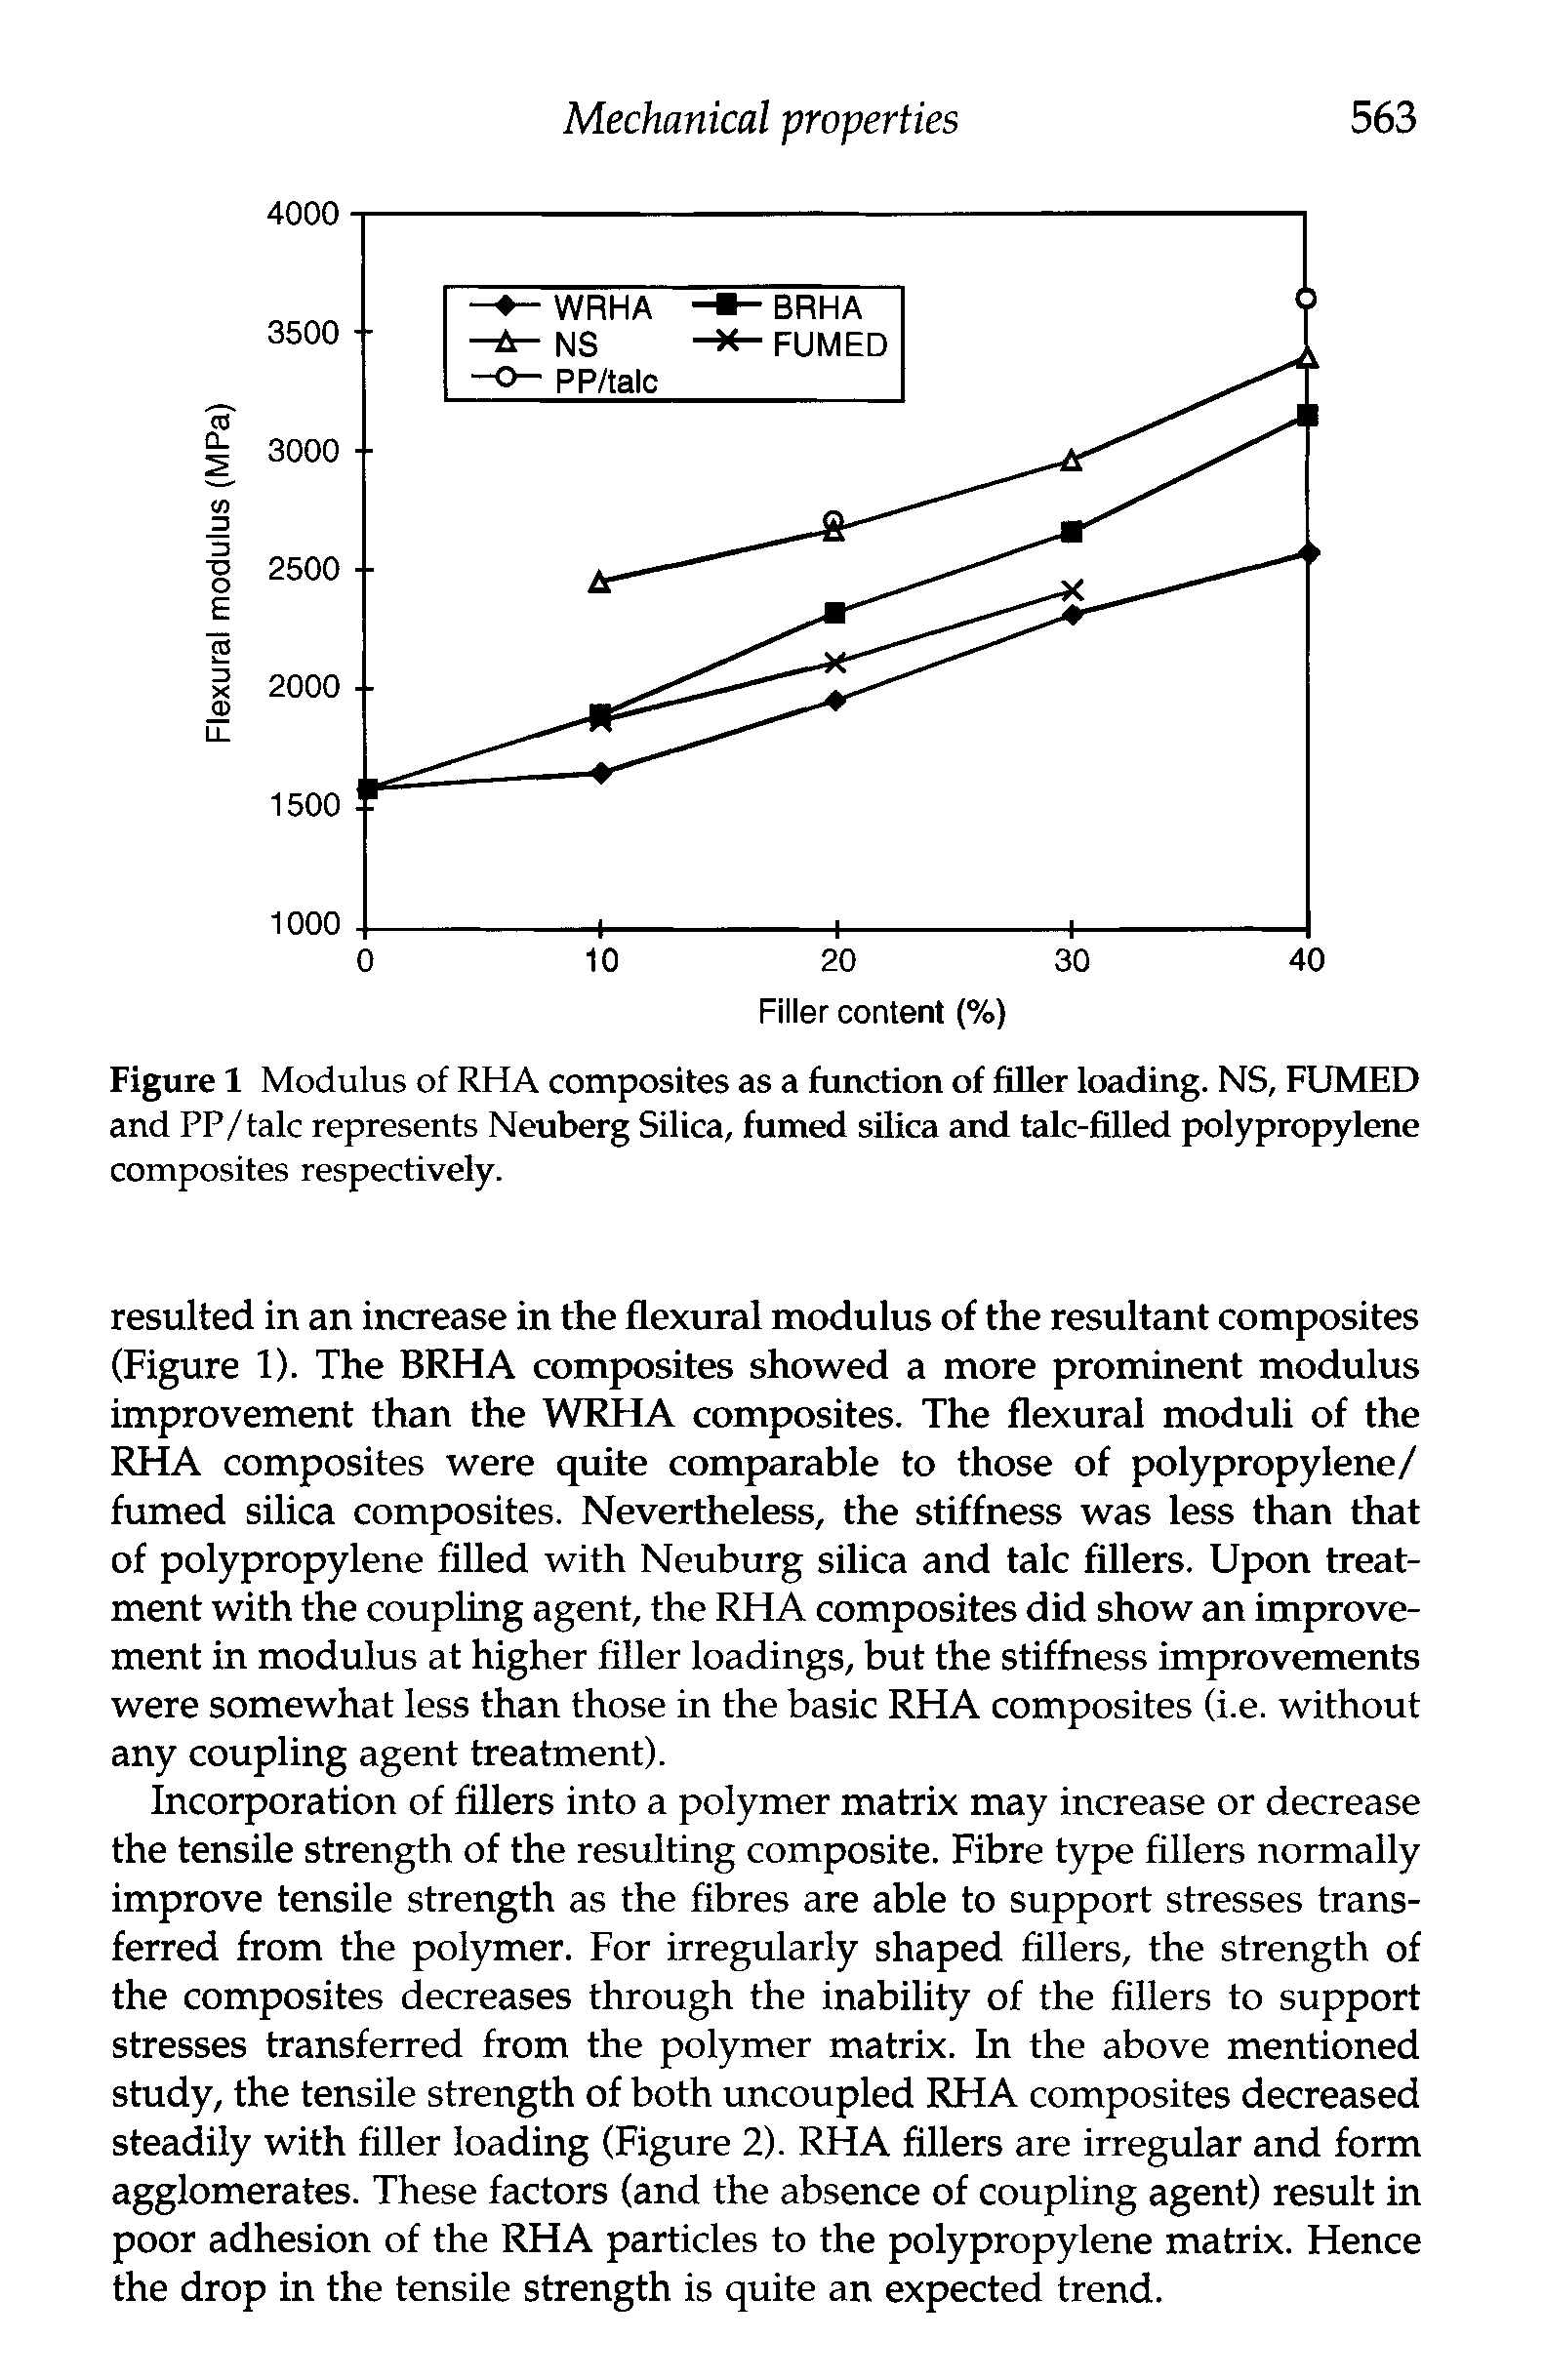 Figure 1 Modulus of RHA composites as a function of filler loading. NS, FUMED and PP/talc represents Neuberg Silica, fumed silica and talc-filled polypropylene...